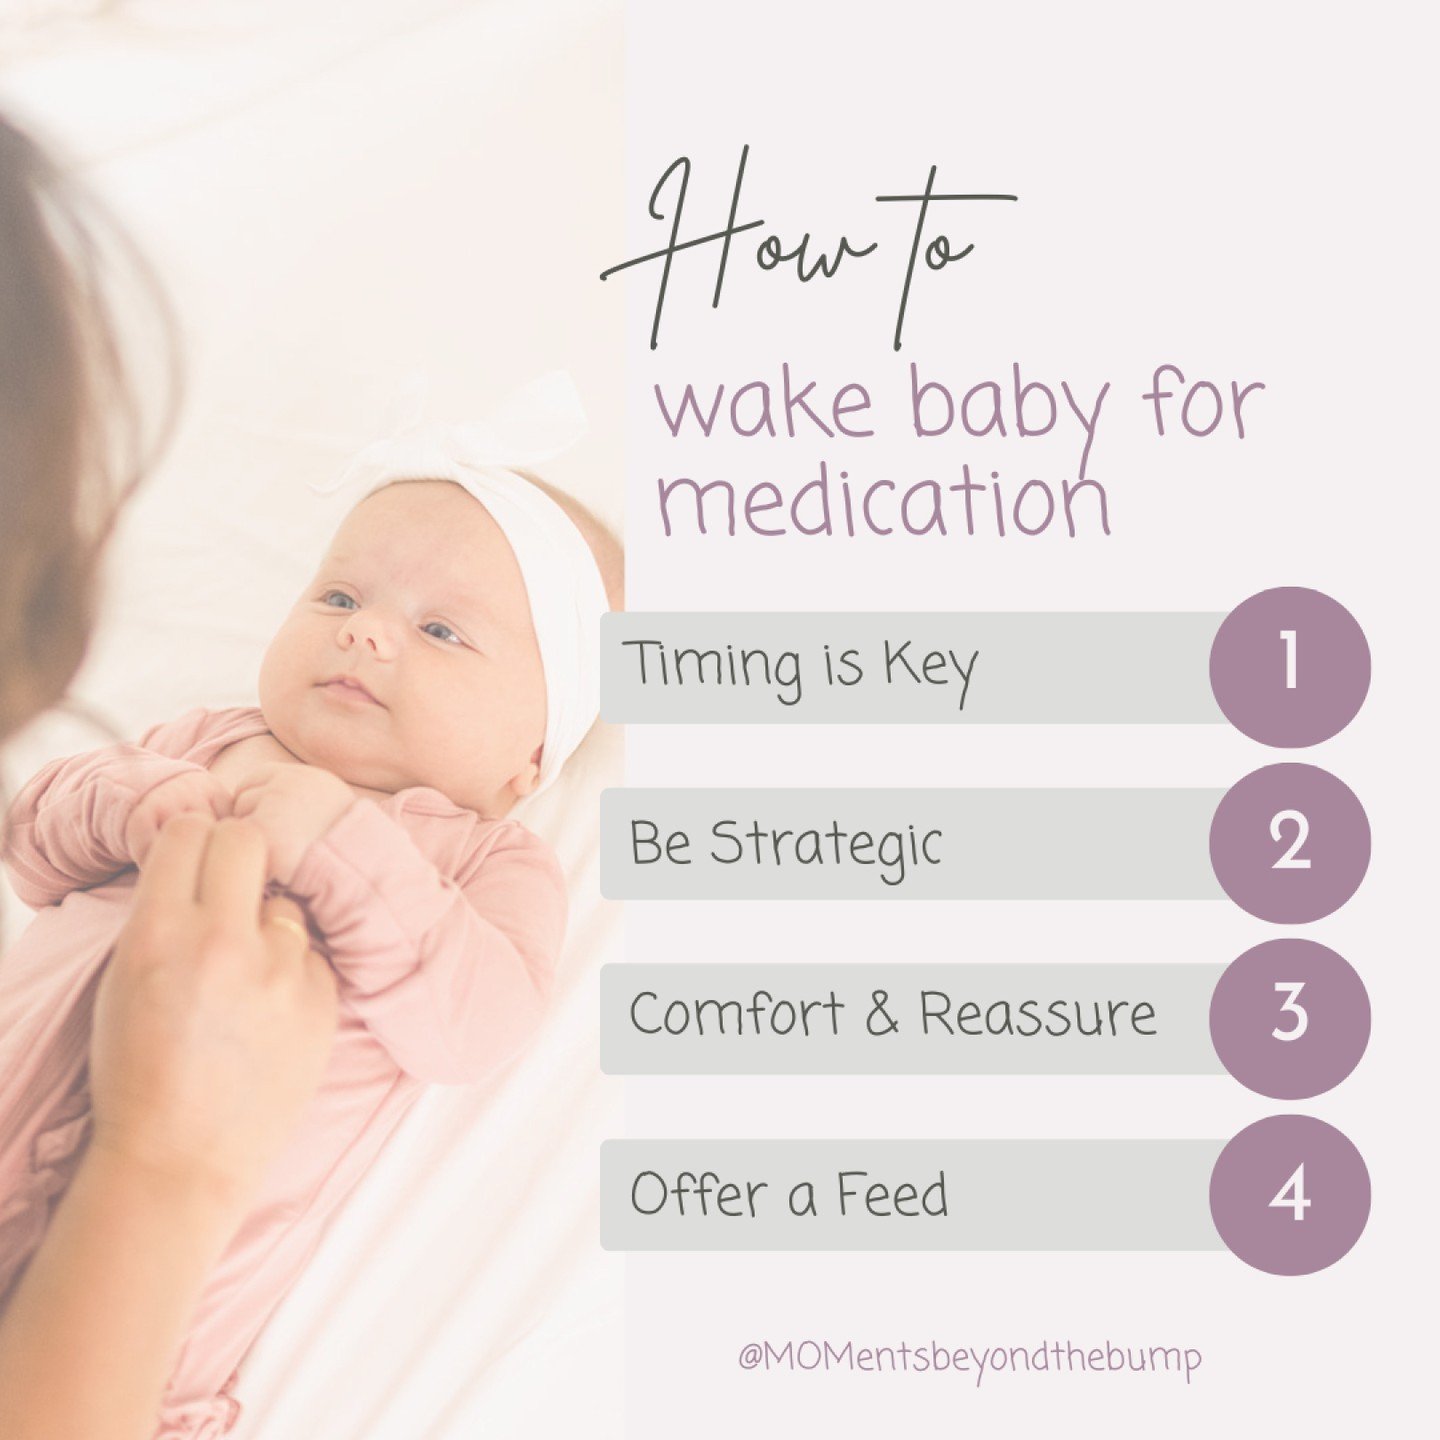 💊Let's chat about a scenario a lot of my clients face... waking baby up for medications throughout the night. 

Whether it's for a fever, reflux, or any other medical need, interrupting your little one's precious sleep can be challenging. But fear n